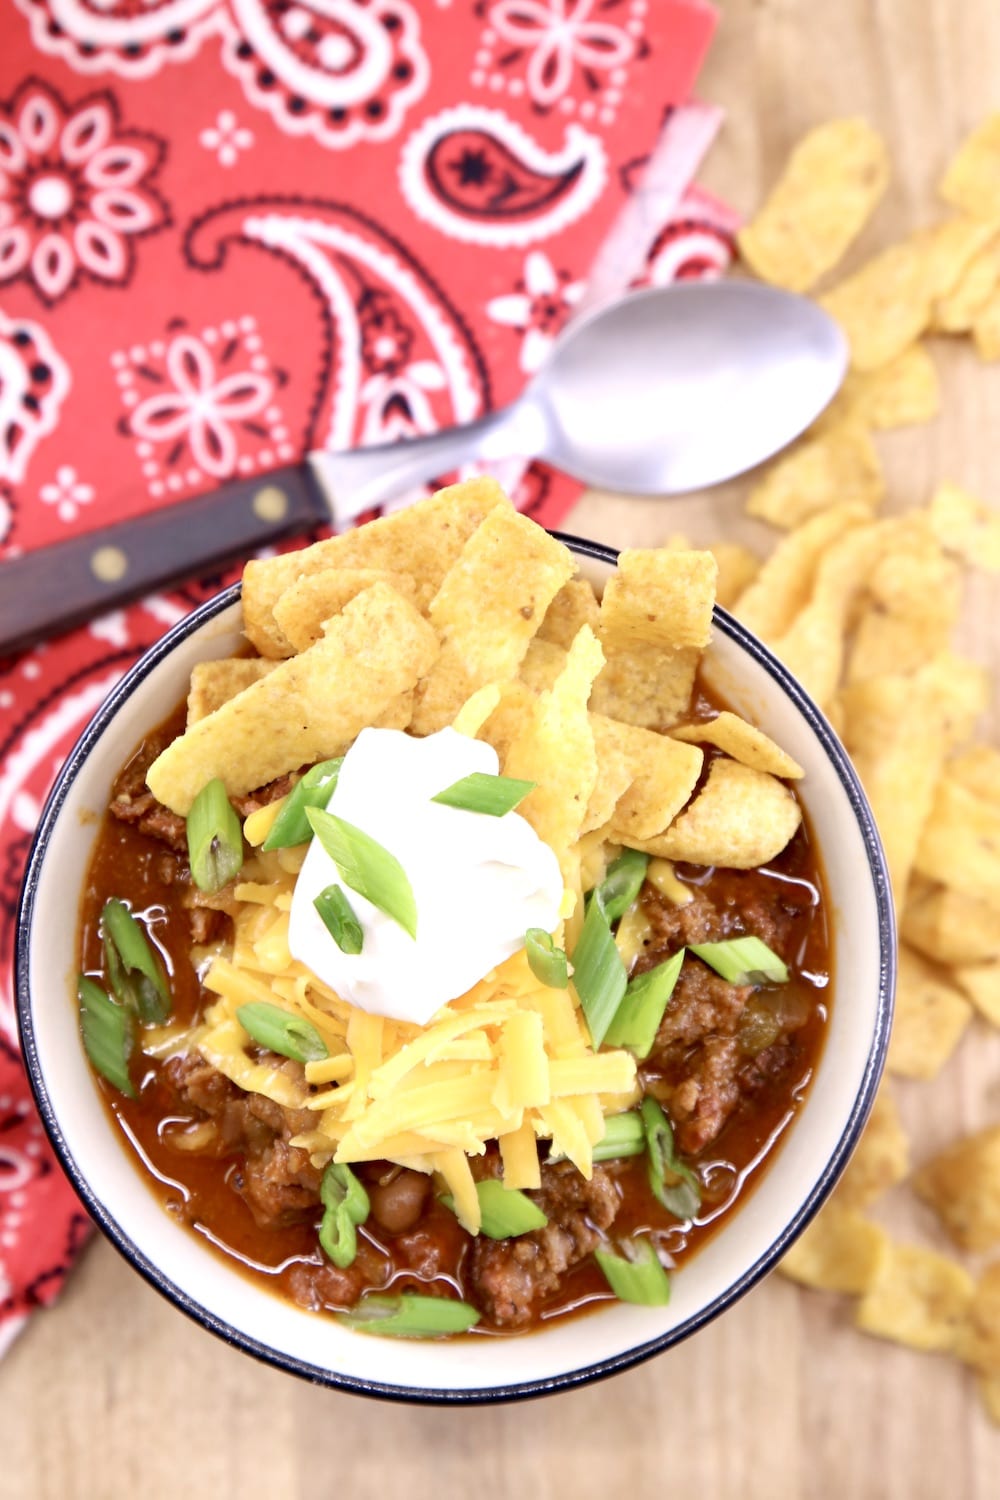 bowl of chili with Fritos, chili, green onions and sour cream. Sitting on a red bandana napkin with a wood handled spoon